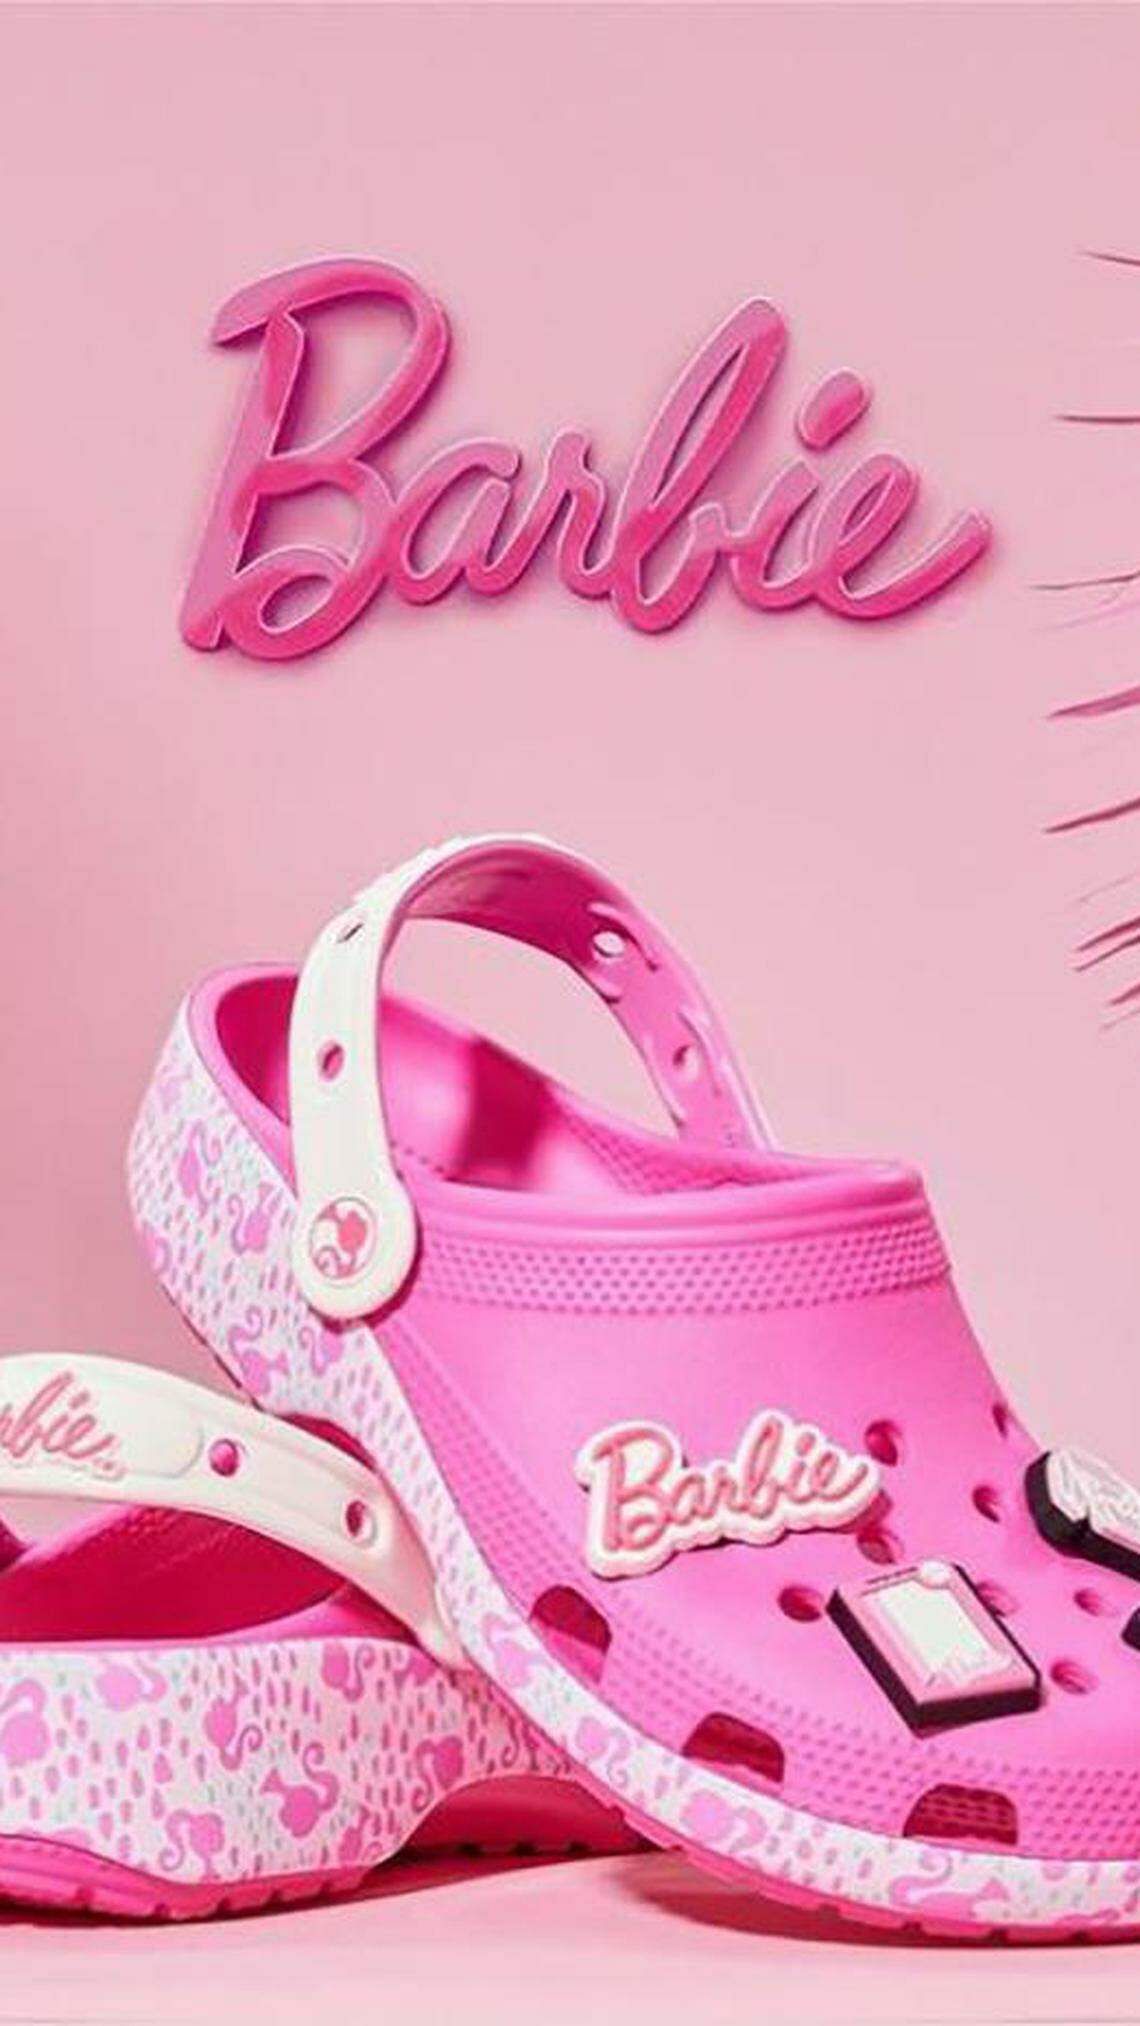 Live Your Best Barbiecore Life In The New Capsule Collection From Crocs —  Fashion and Fandom